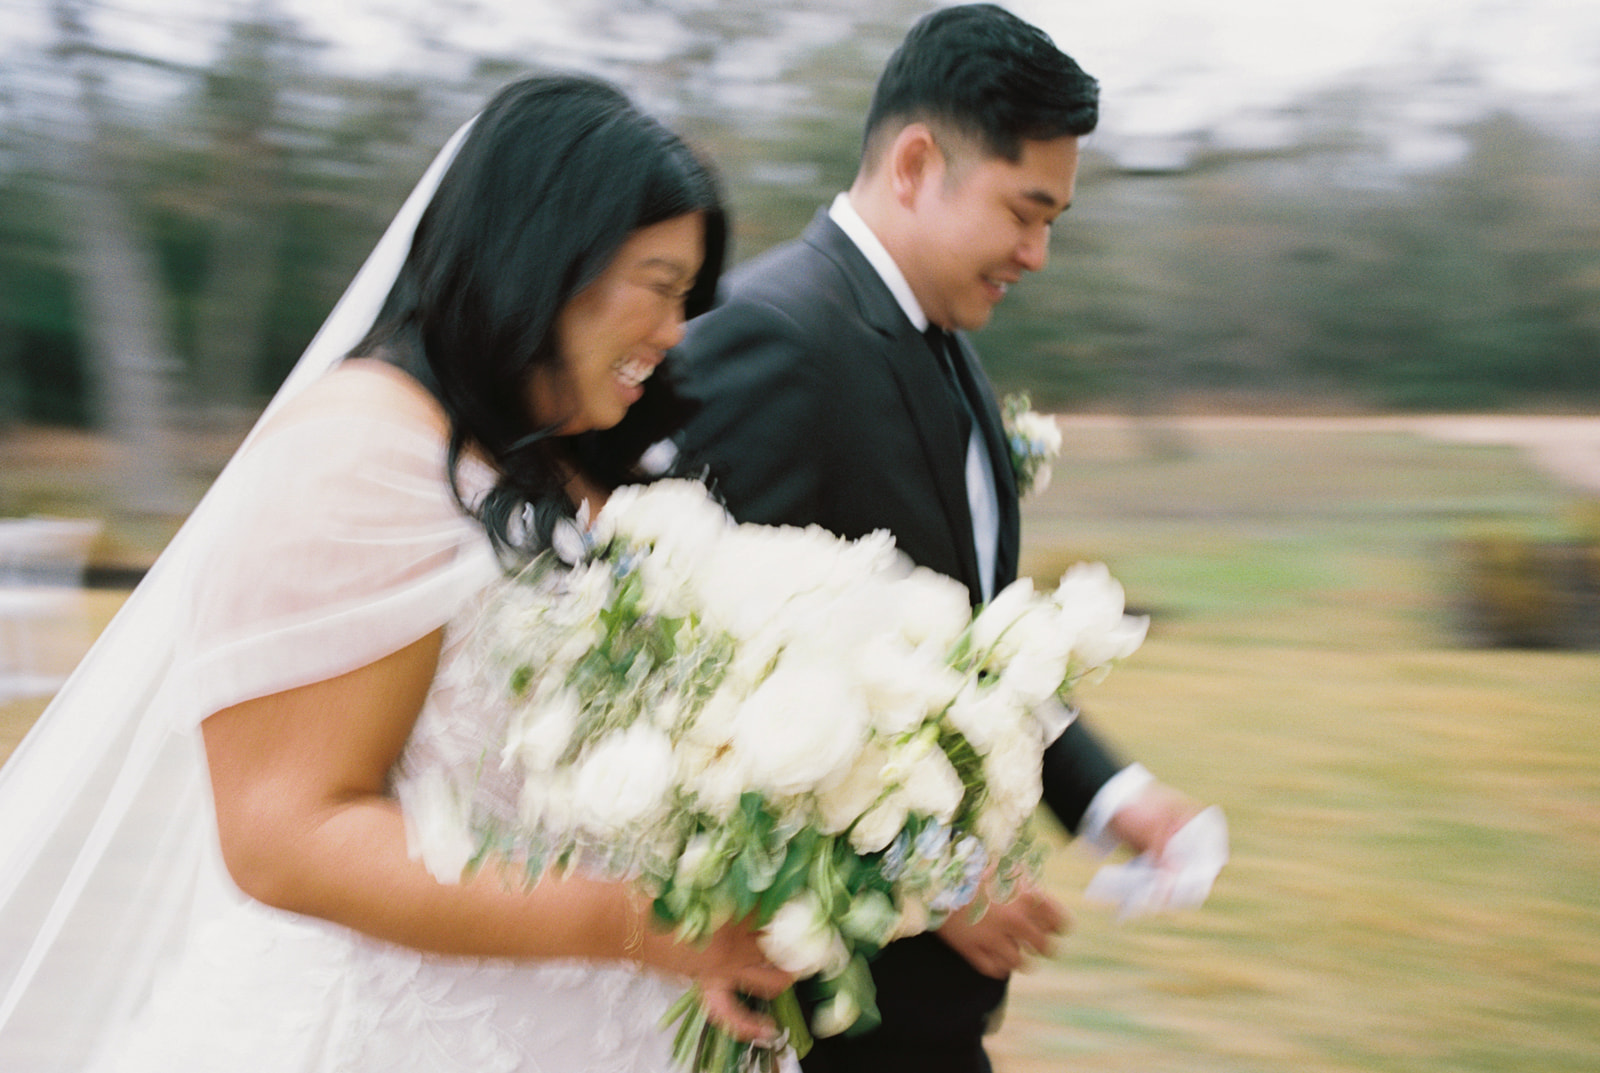 This Sweet Couple Got Married at The Grand Lady on a Rainy Winter Day in Austin Texas.